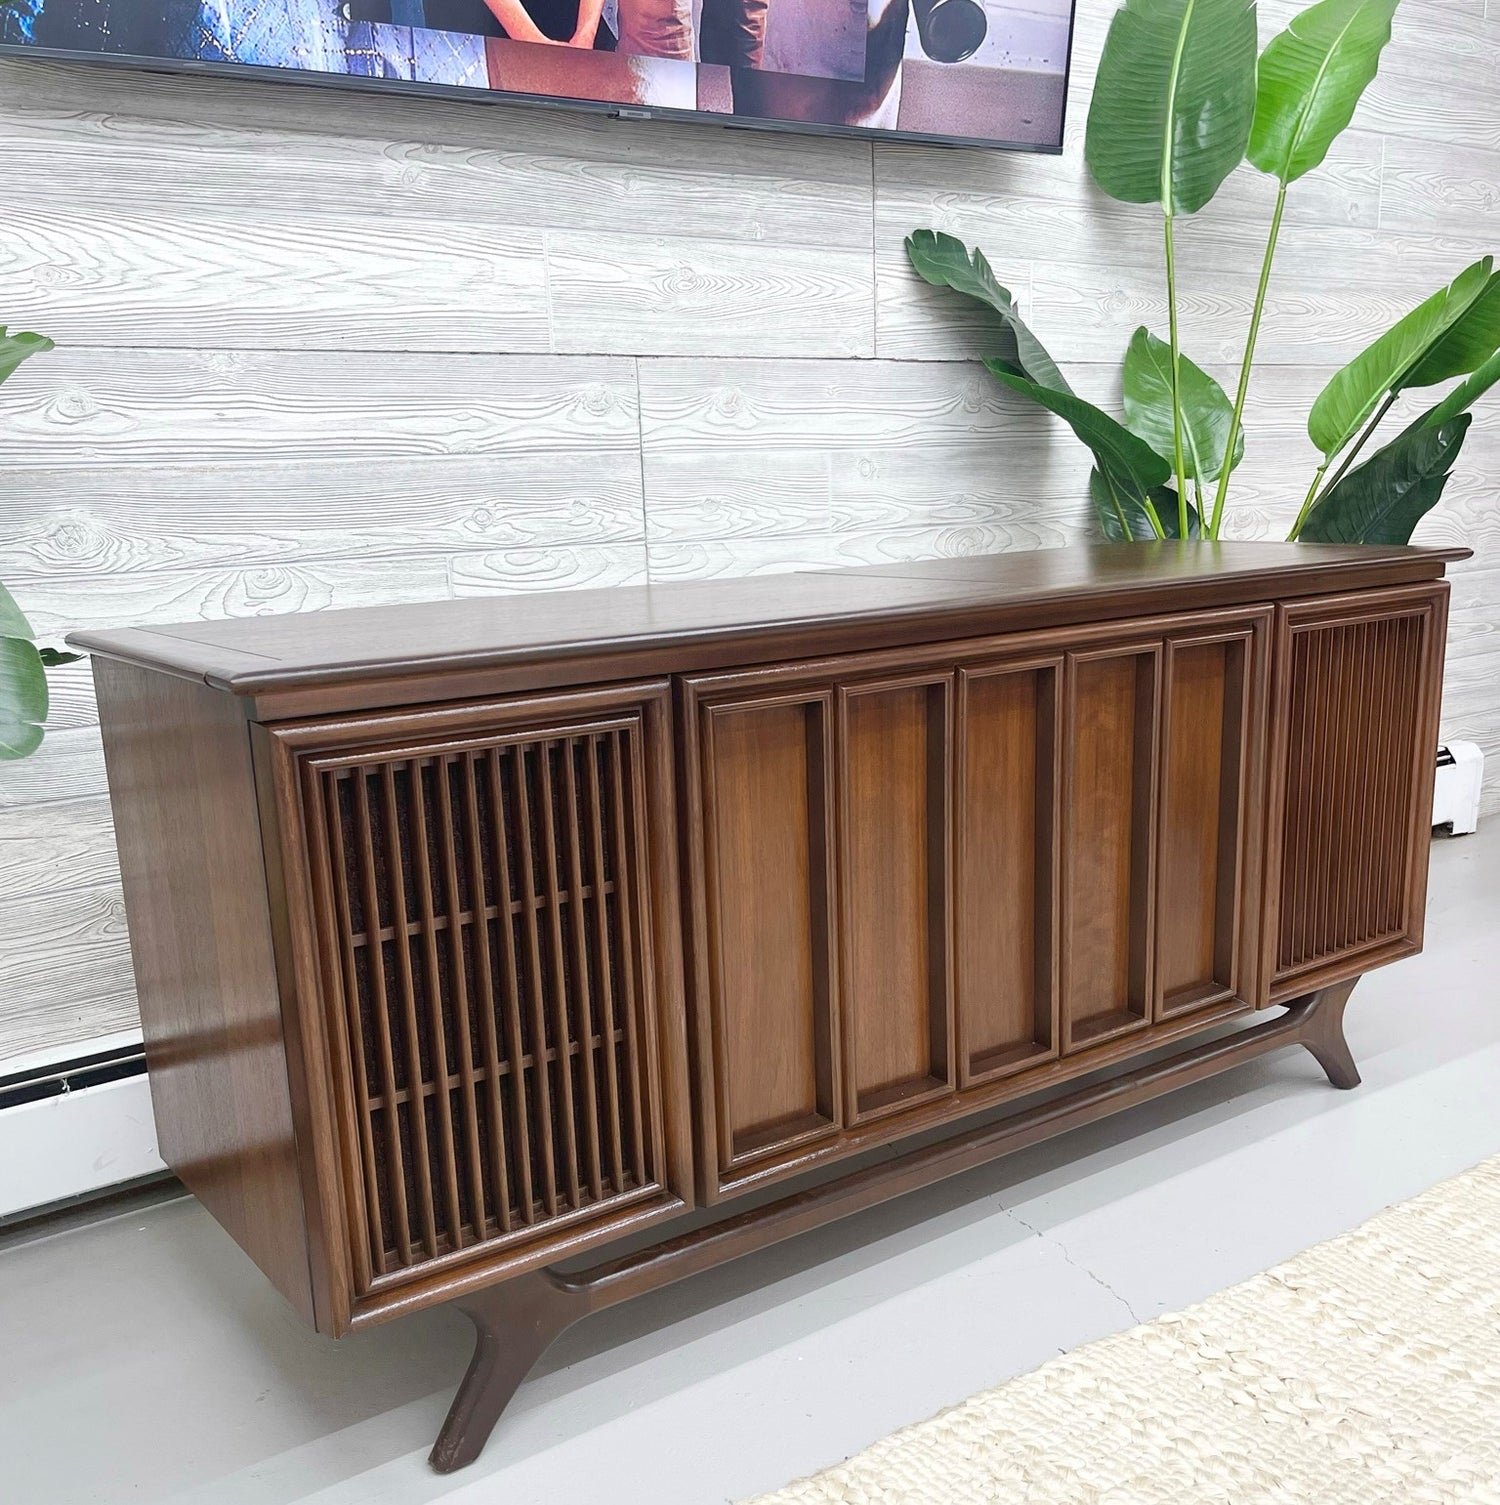 SYLVANIA Vintage Stereo Console Record Player Changer AM FM Bluetooth The Vintedge Co.